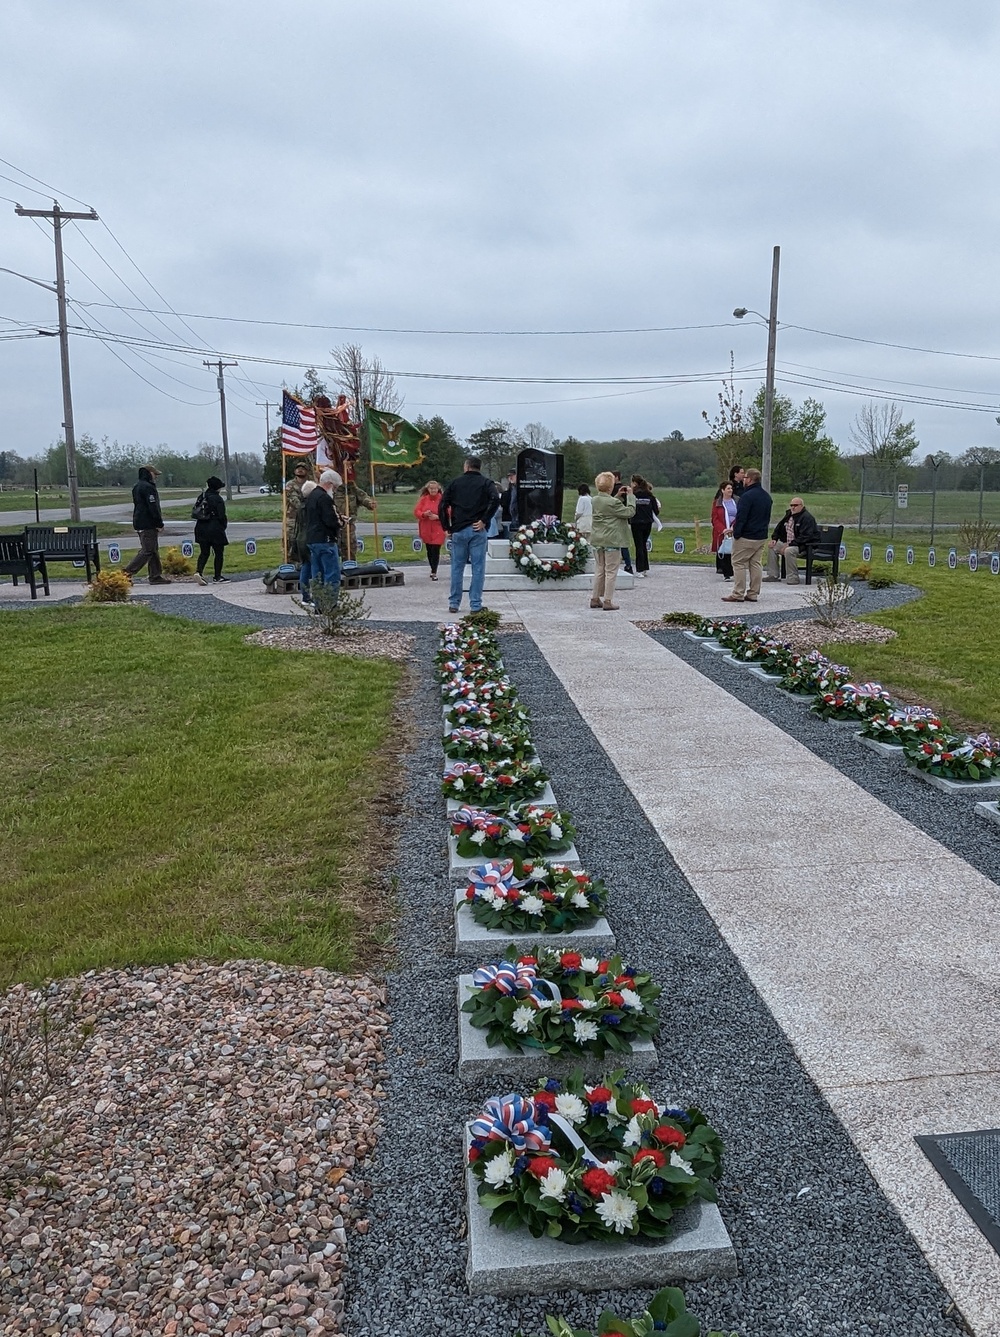 Fort Drum Military Police unveil a lasting tribute to military working dogs